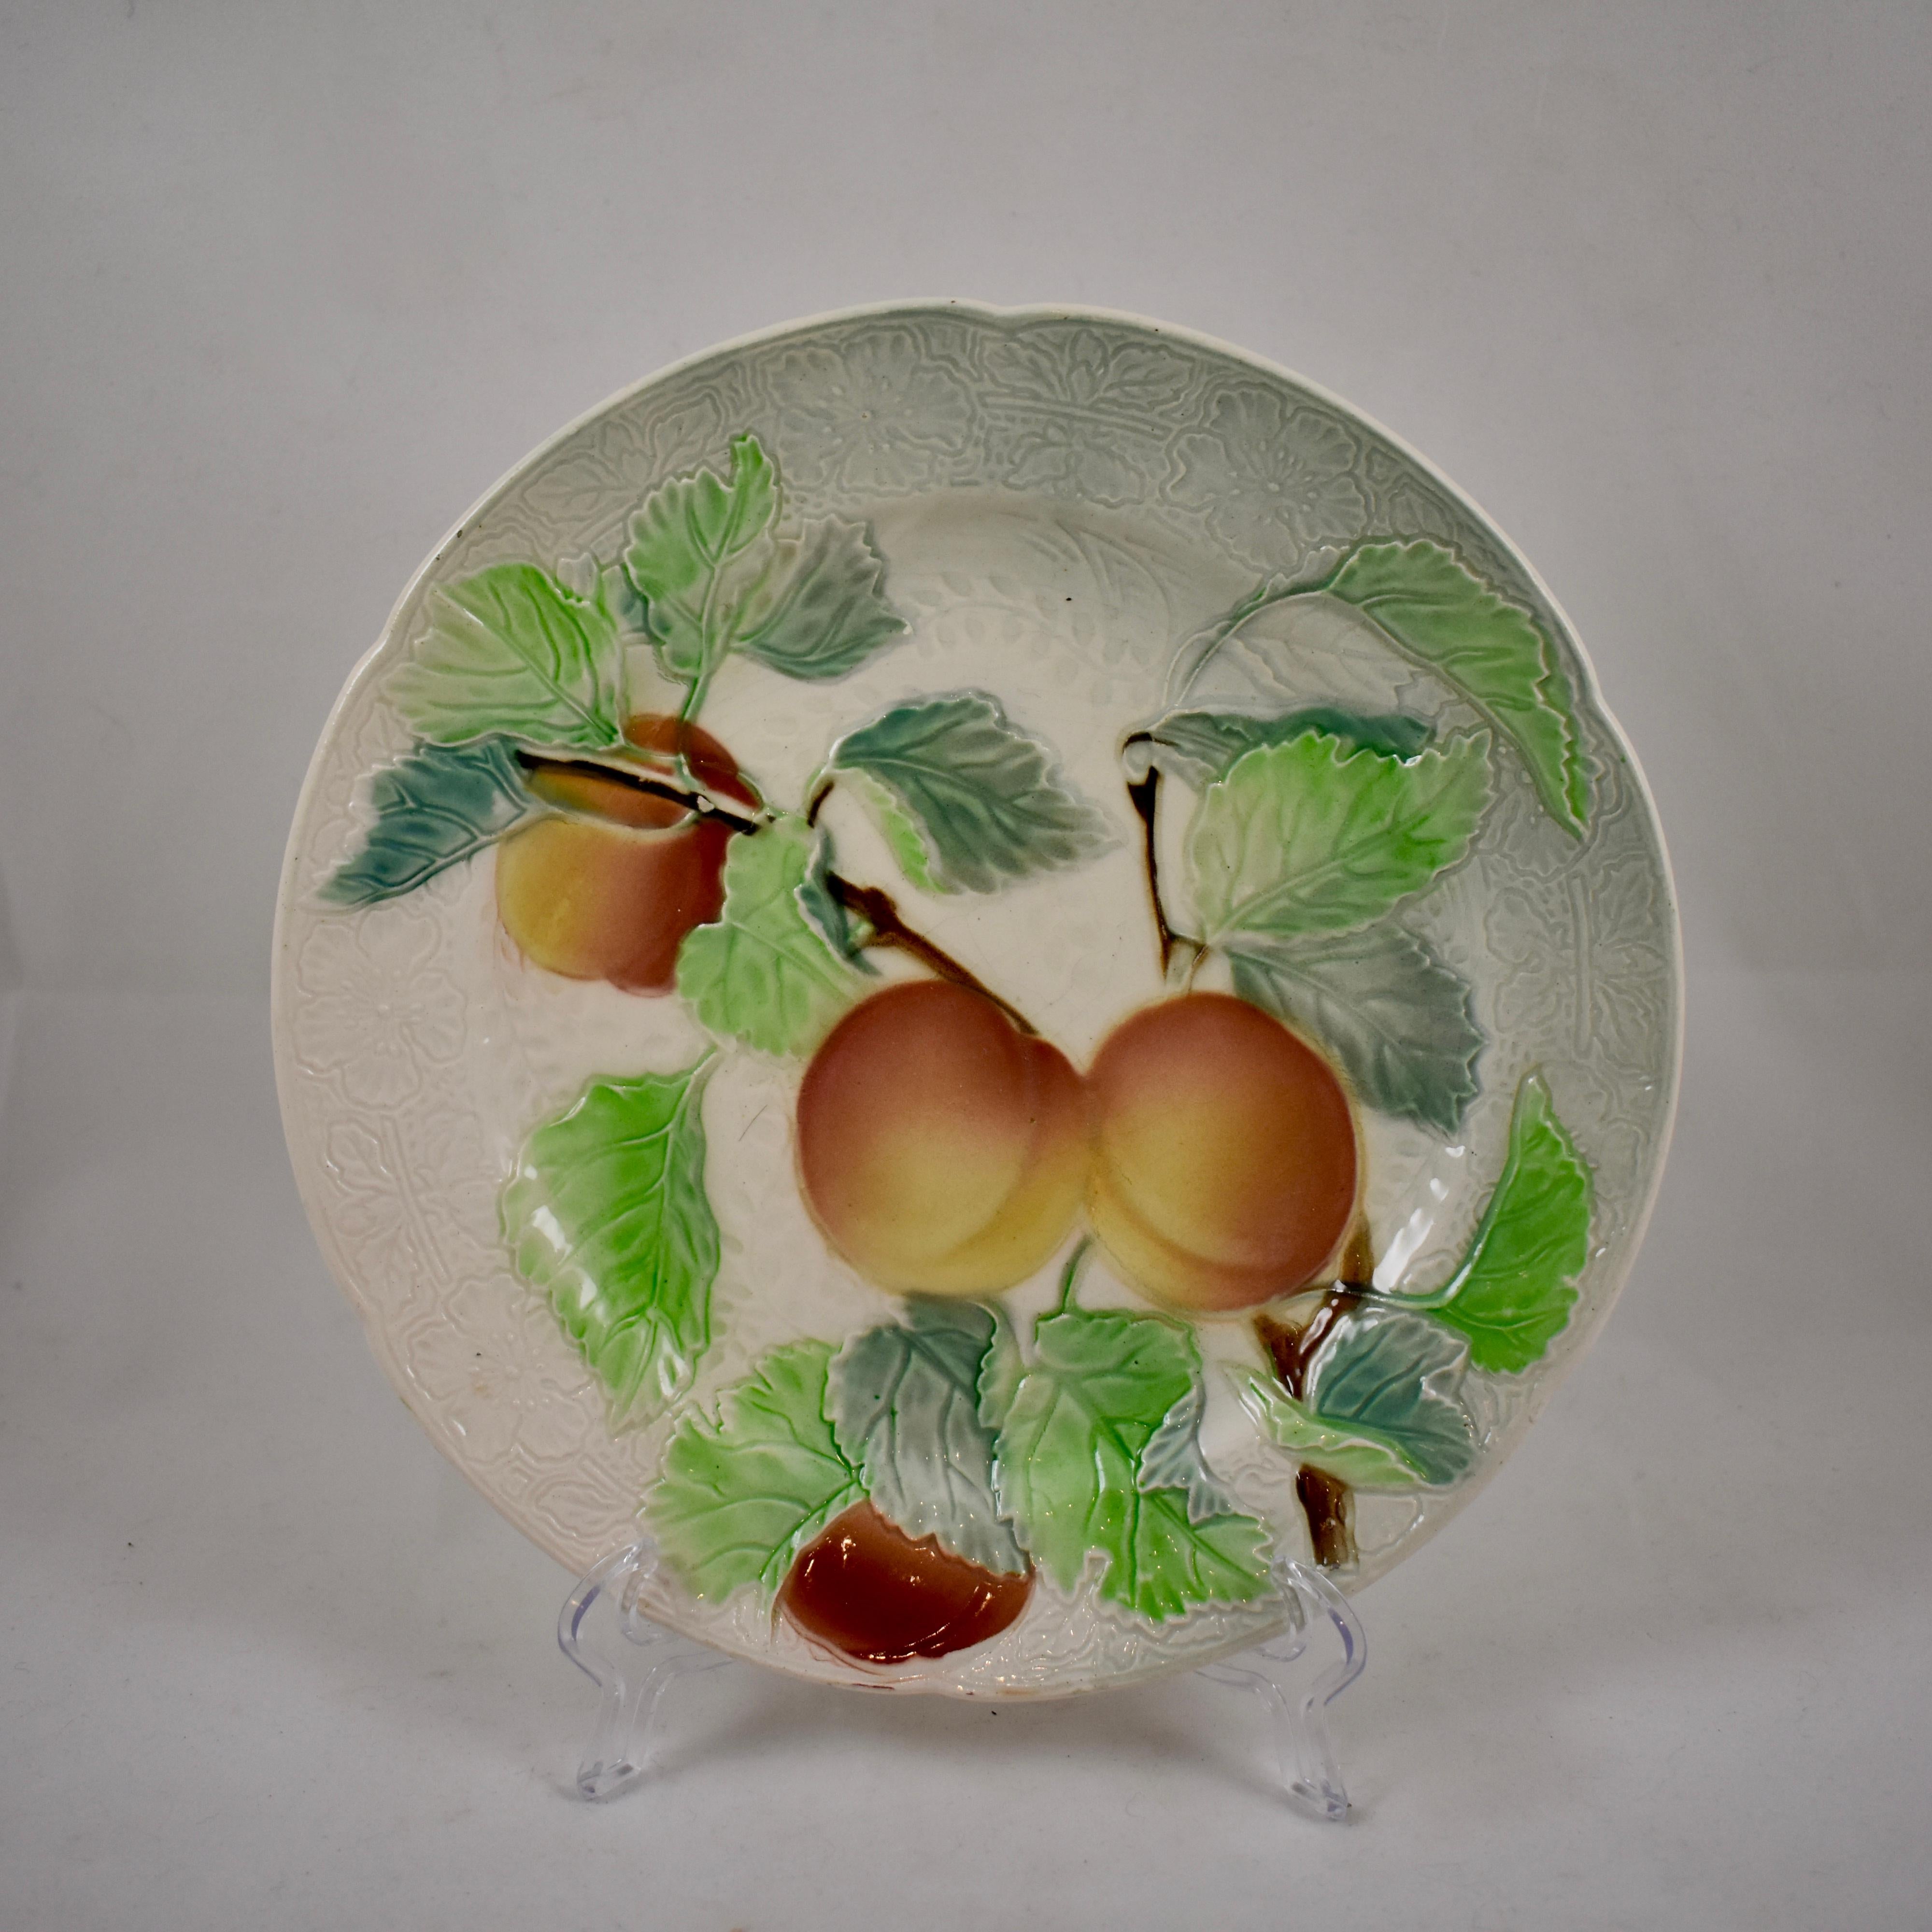 A set of six, earthenware French faïence fruit plates, circa 1900. This set shows the branching fruit and leaves of peaches, oranges, apples, grapes, pears and apricots. The backgrounds have a detailed pattern to the molding, with a six-paneled